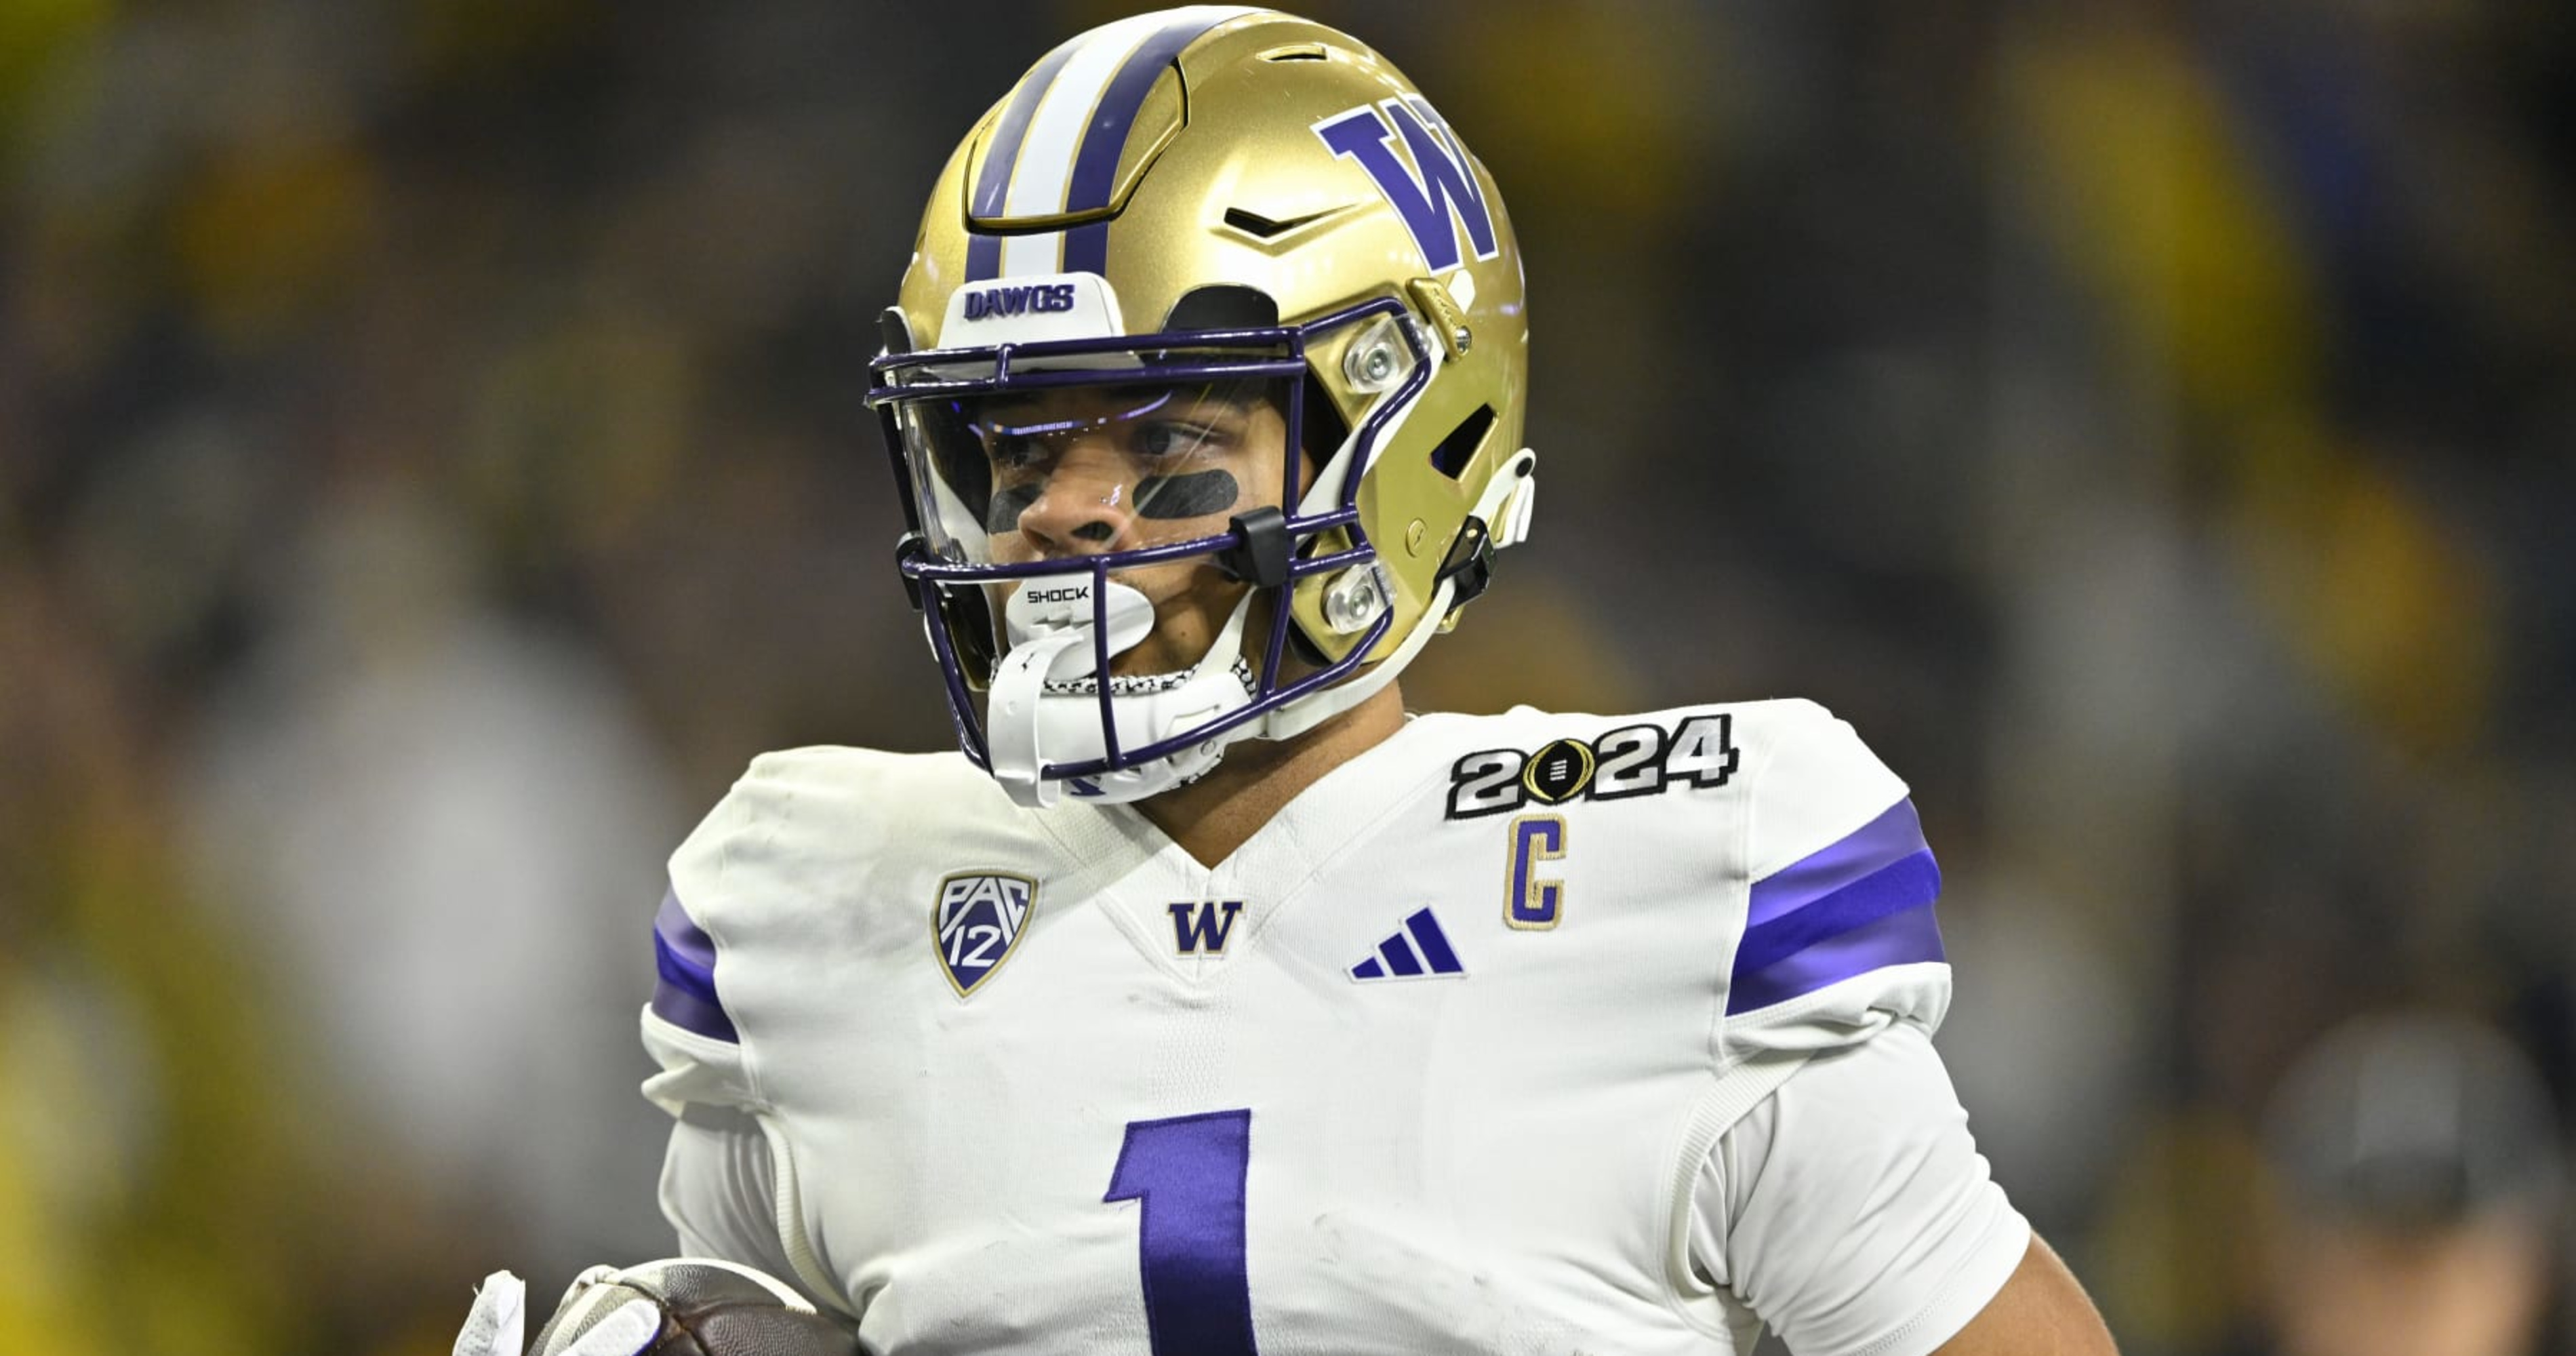 Report: Washington WR Rome Odunze to Work Out at 2024 NFL Combine Amid Draft Buzz